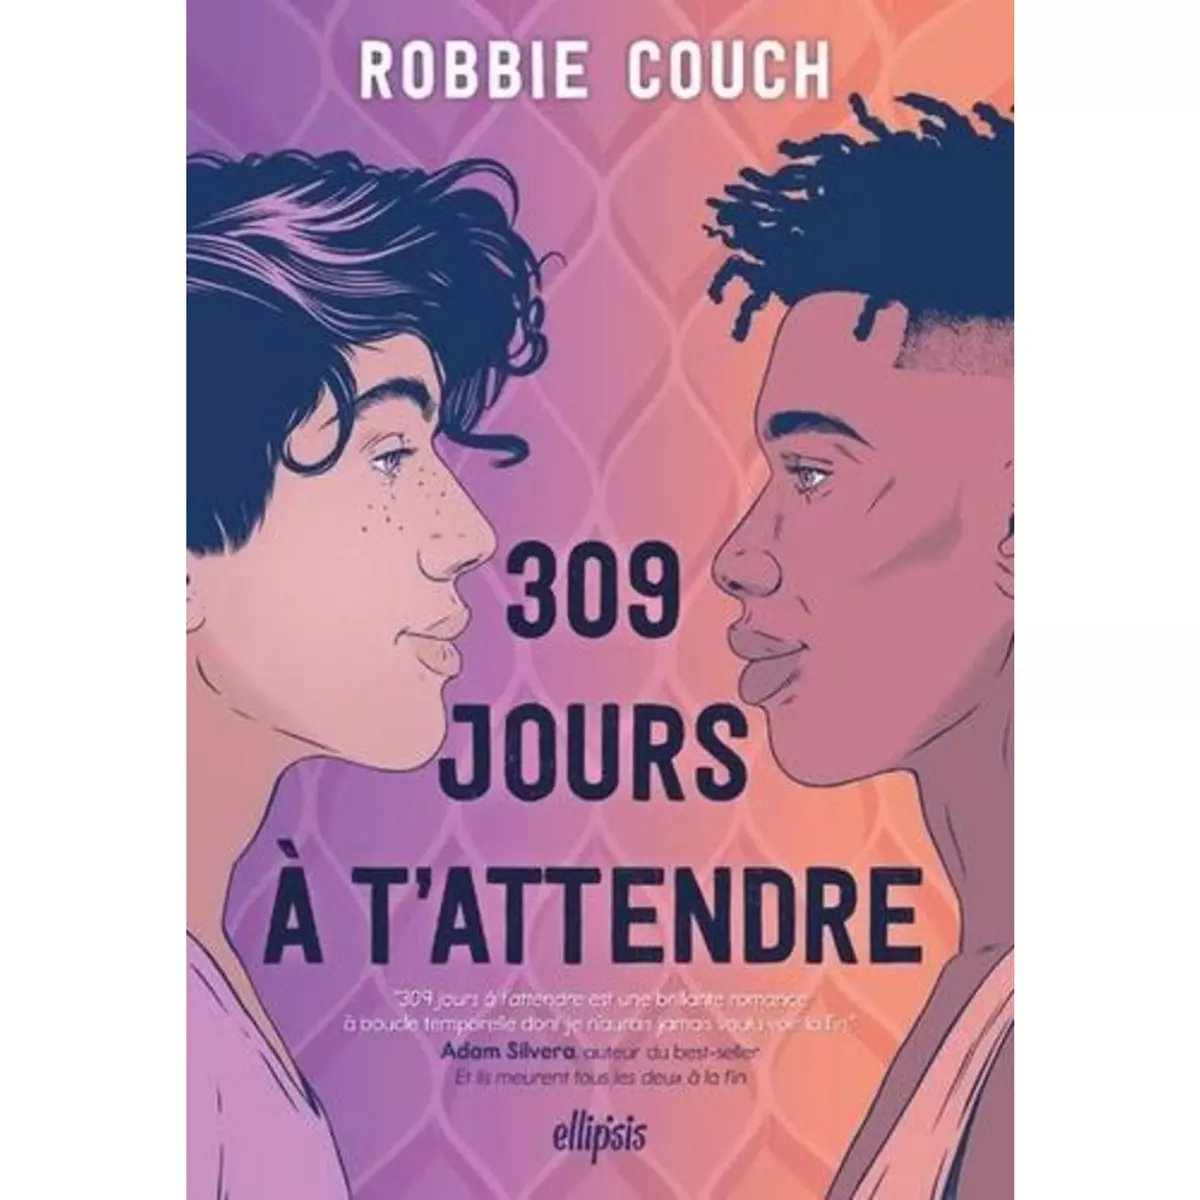  309 JOURS A T'ATTENDRE, Couch Robbie